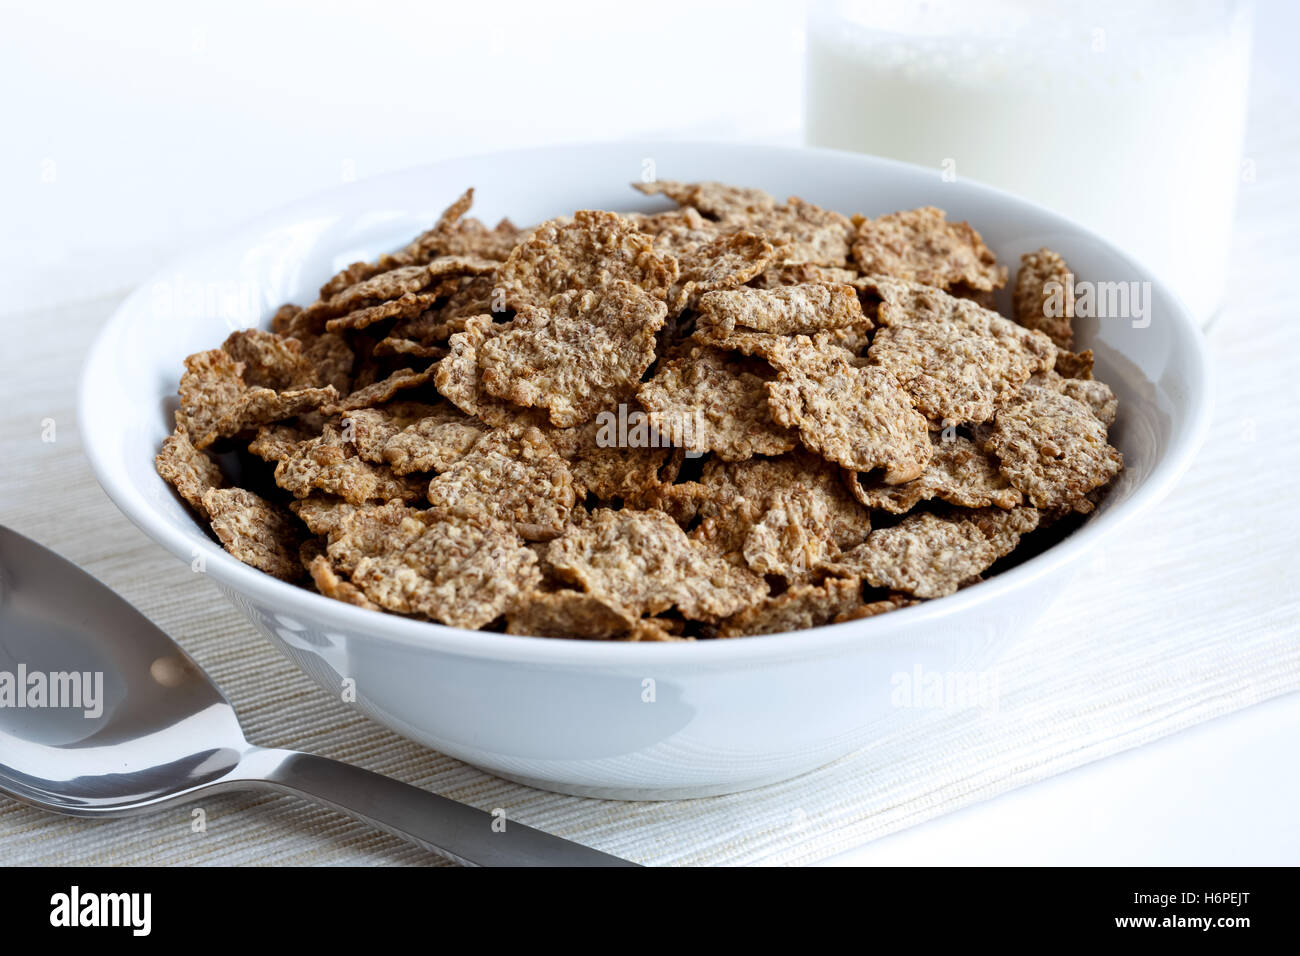 Wheat bran breakfast cereal with no milk in a bowl. On natural beige coloured textured napkin. On white background. With spoon a Stock Photo